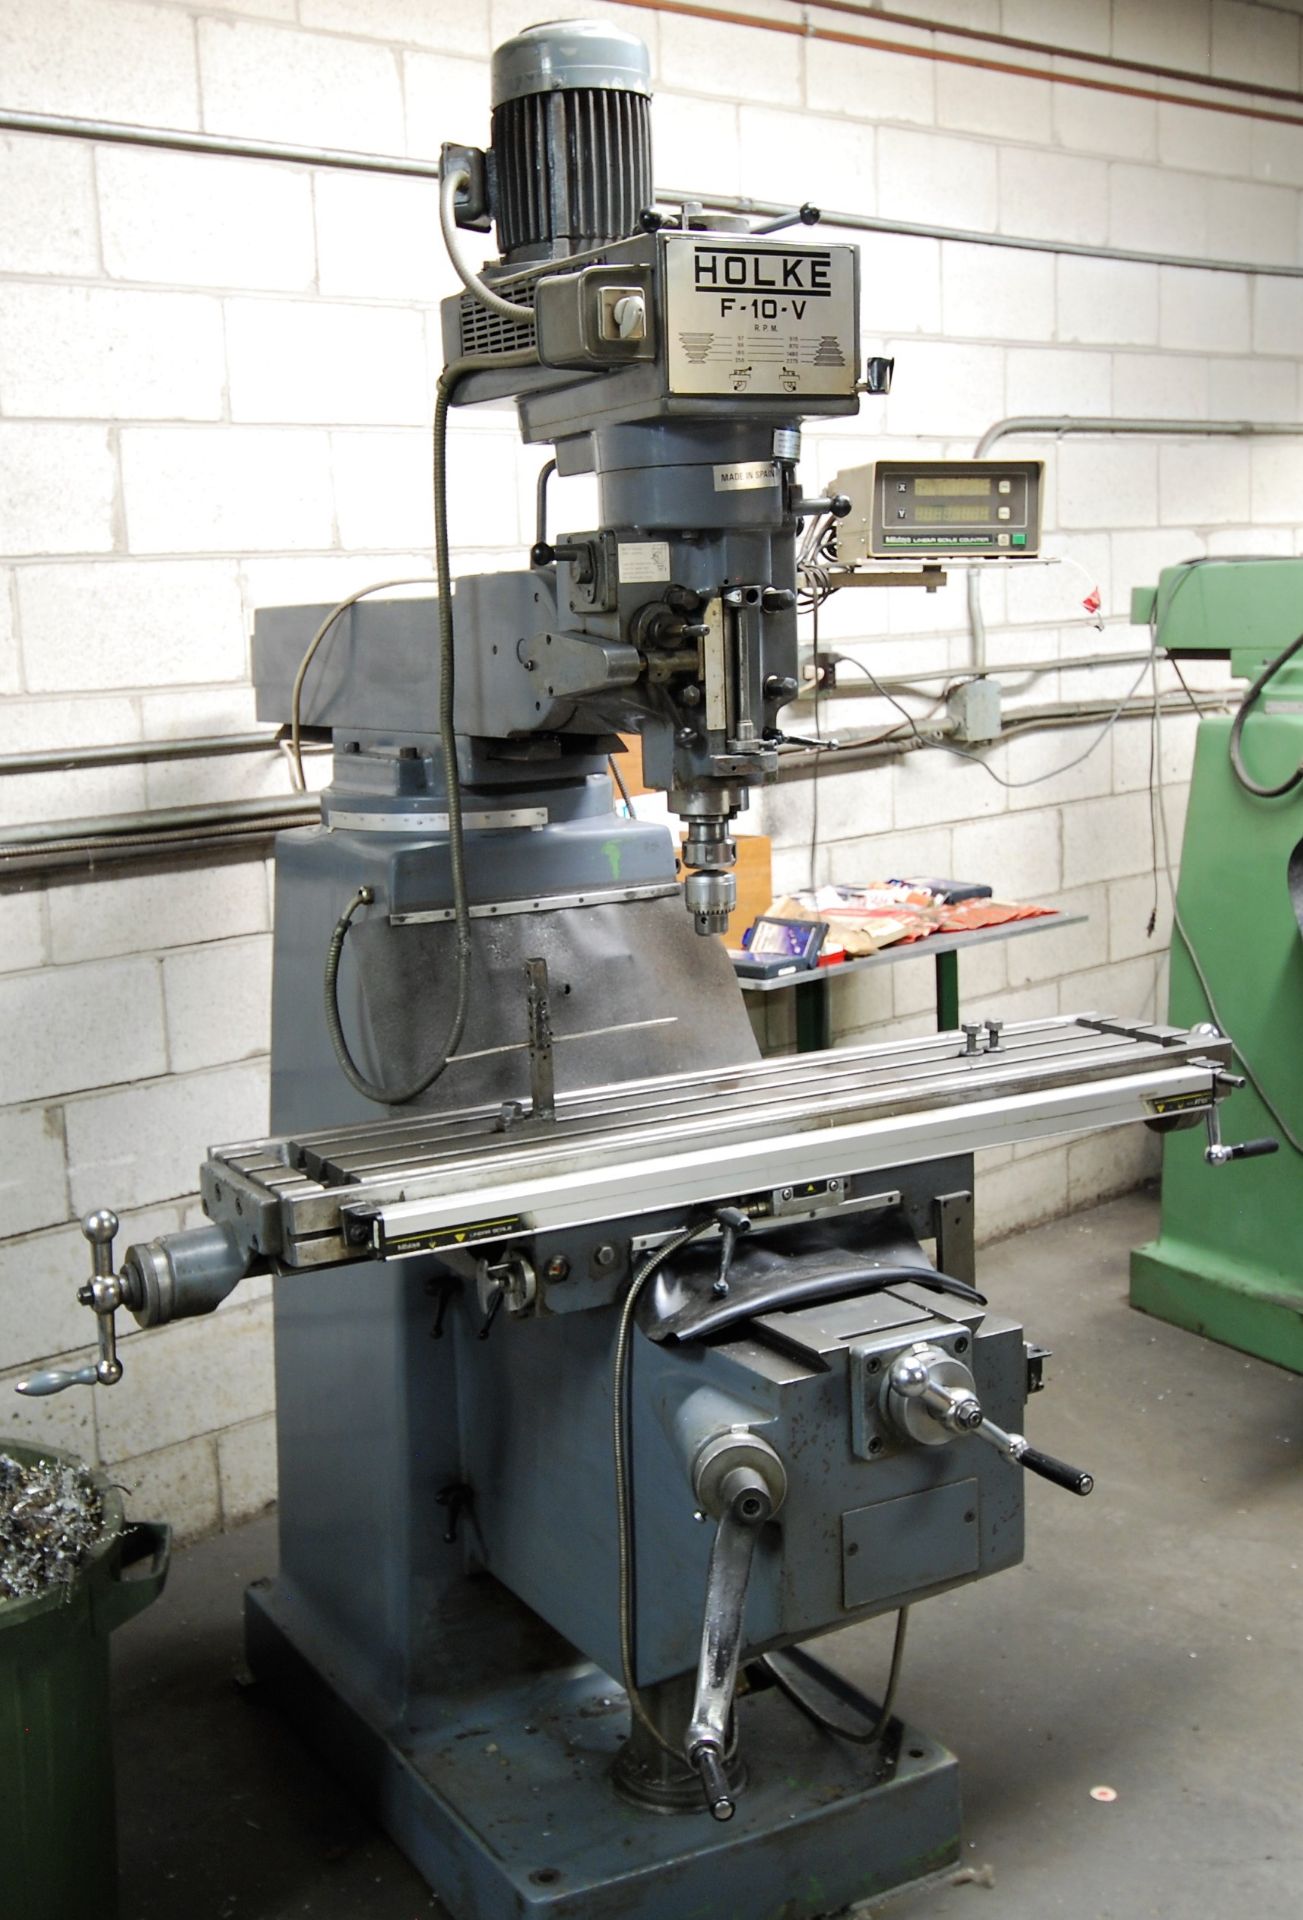 HOLKE F-10-V VERTICAL MILLING MACHINE, 10" X 44" TABLE, MITUTOYO 2-AXIS DRO, SPEEDS TO 2,275 RPM, - Image 3 of 7